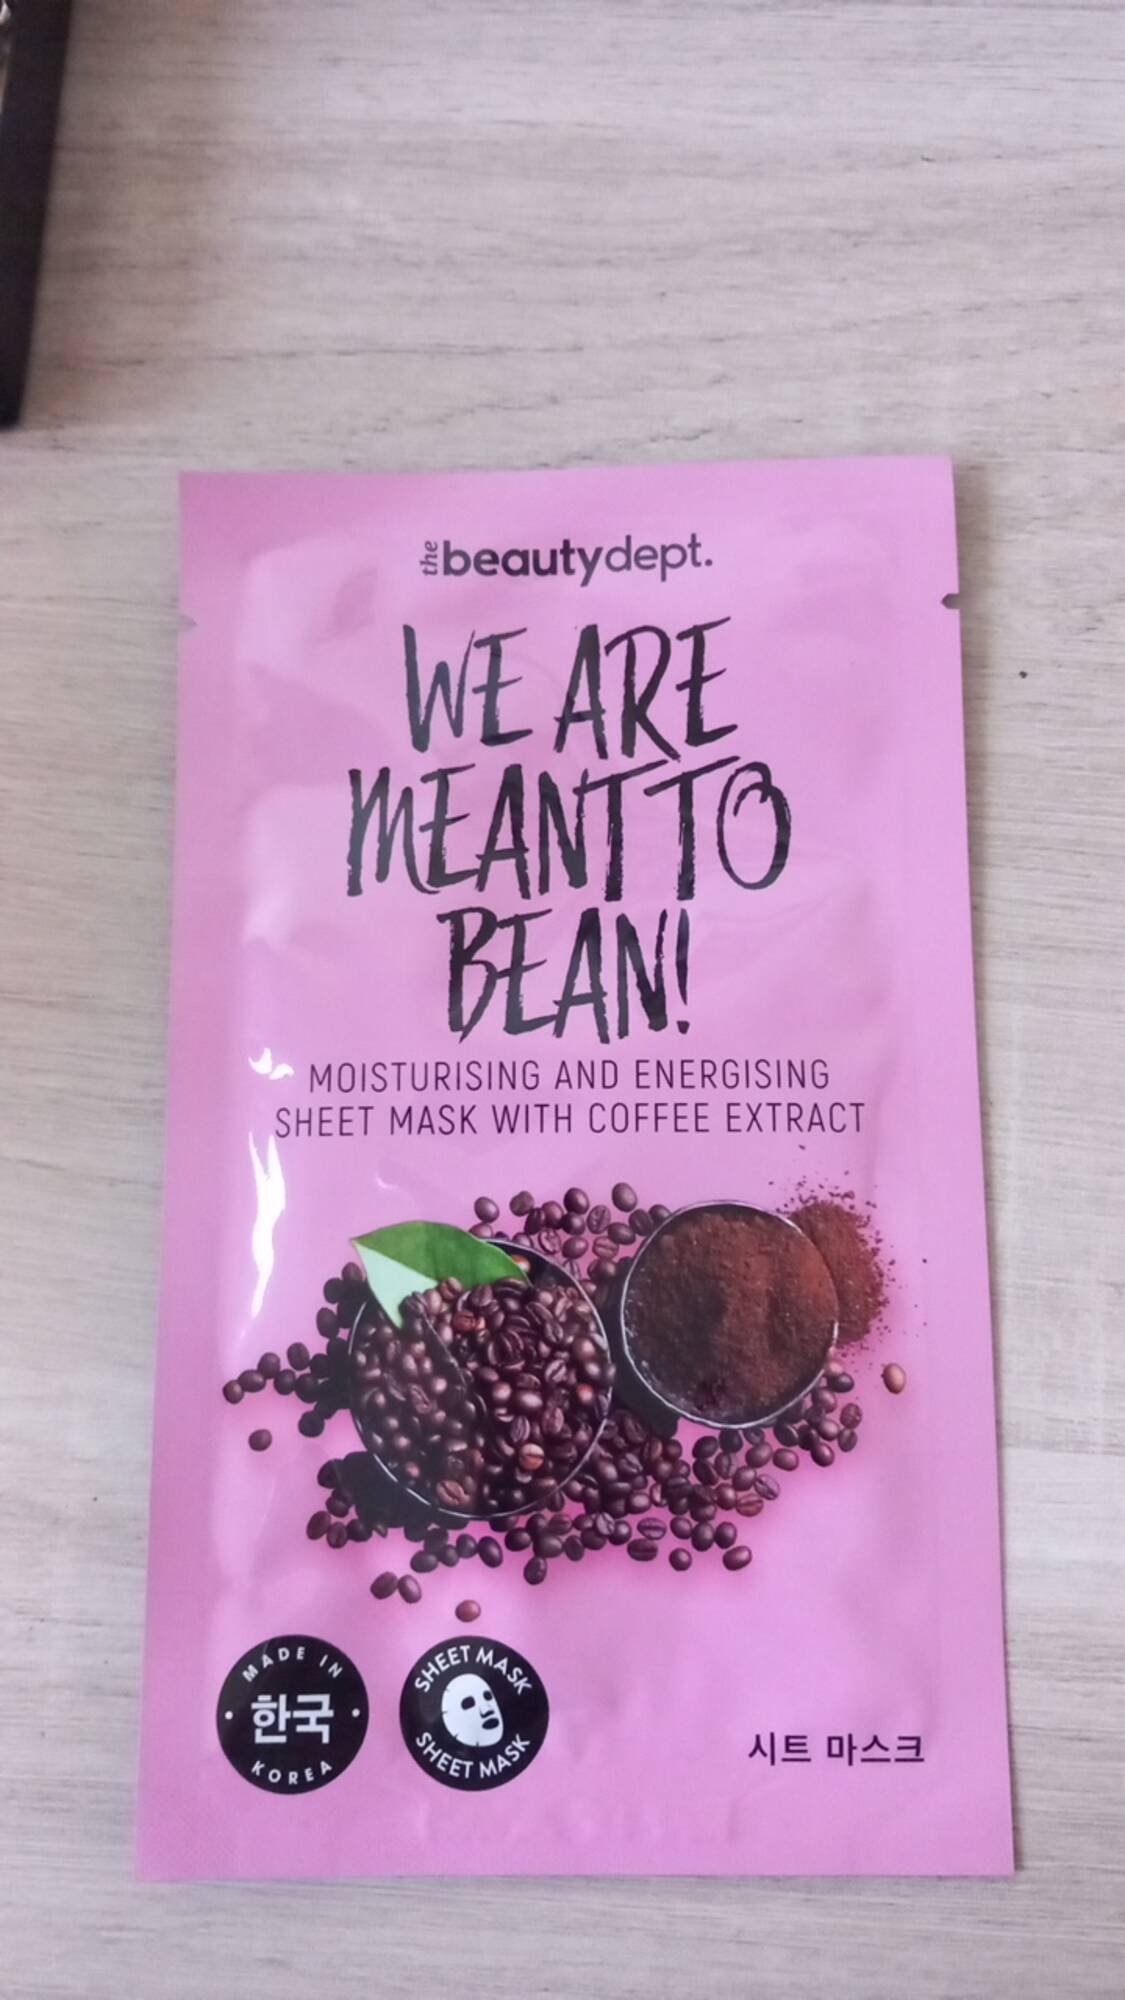 THE BEAUTY DEPT - We are meant to bean! - Sheet mask